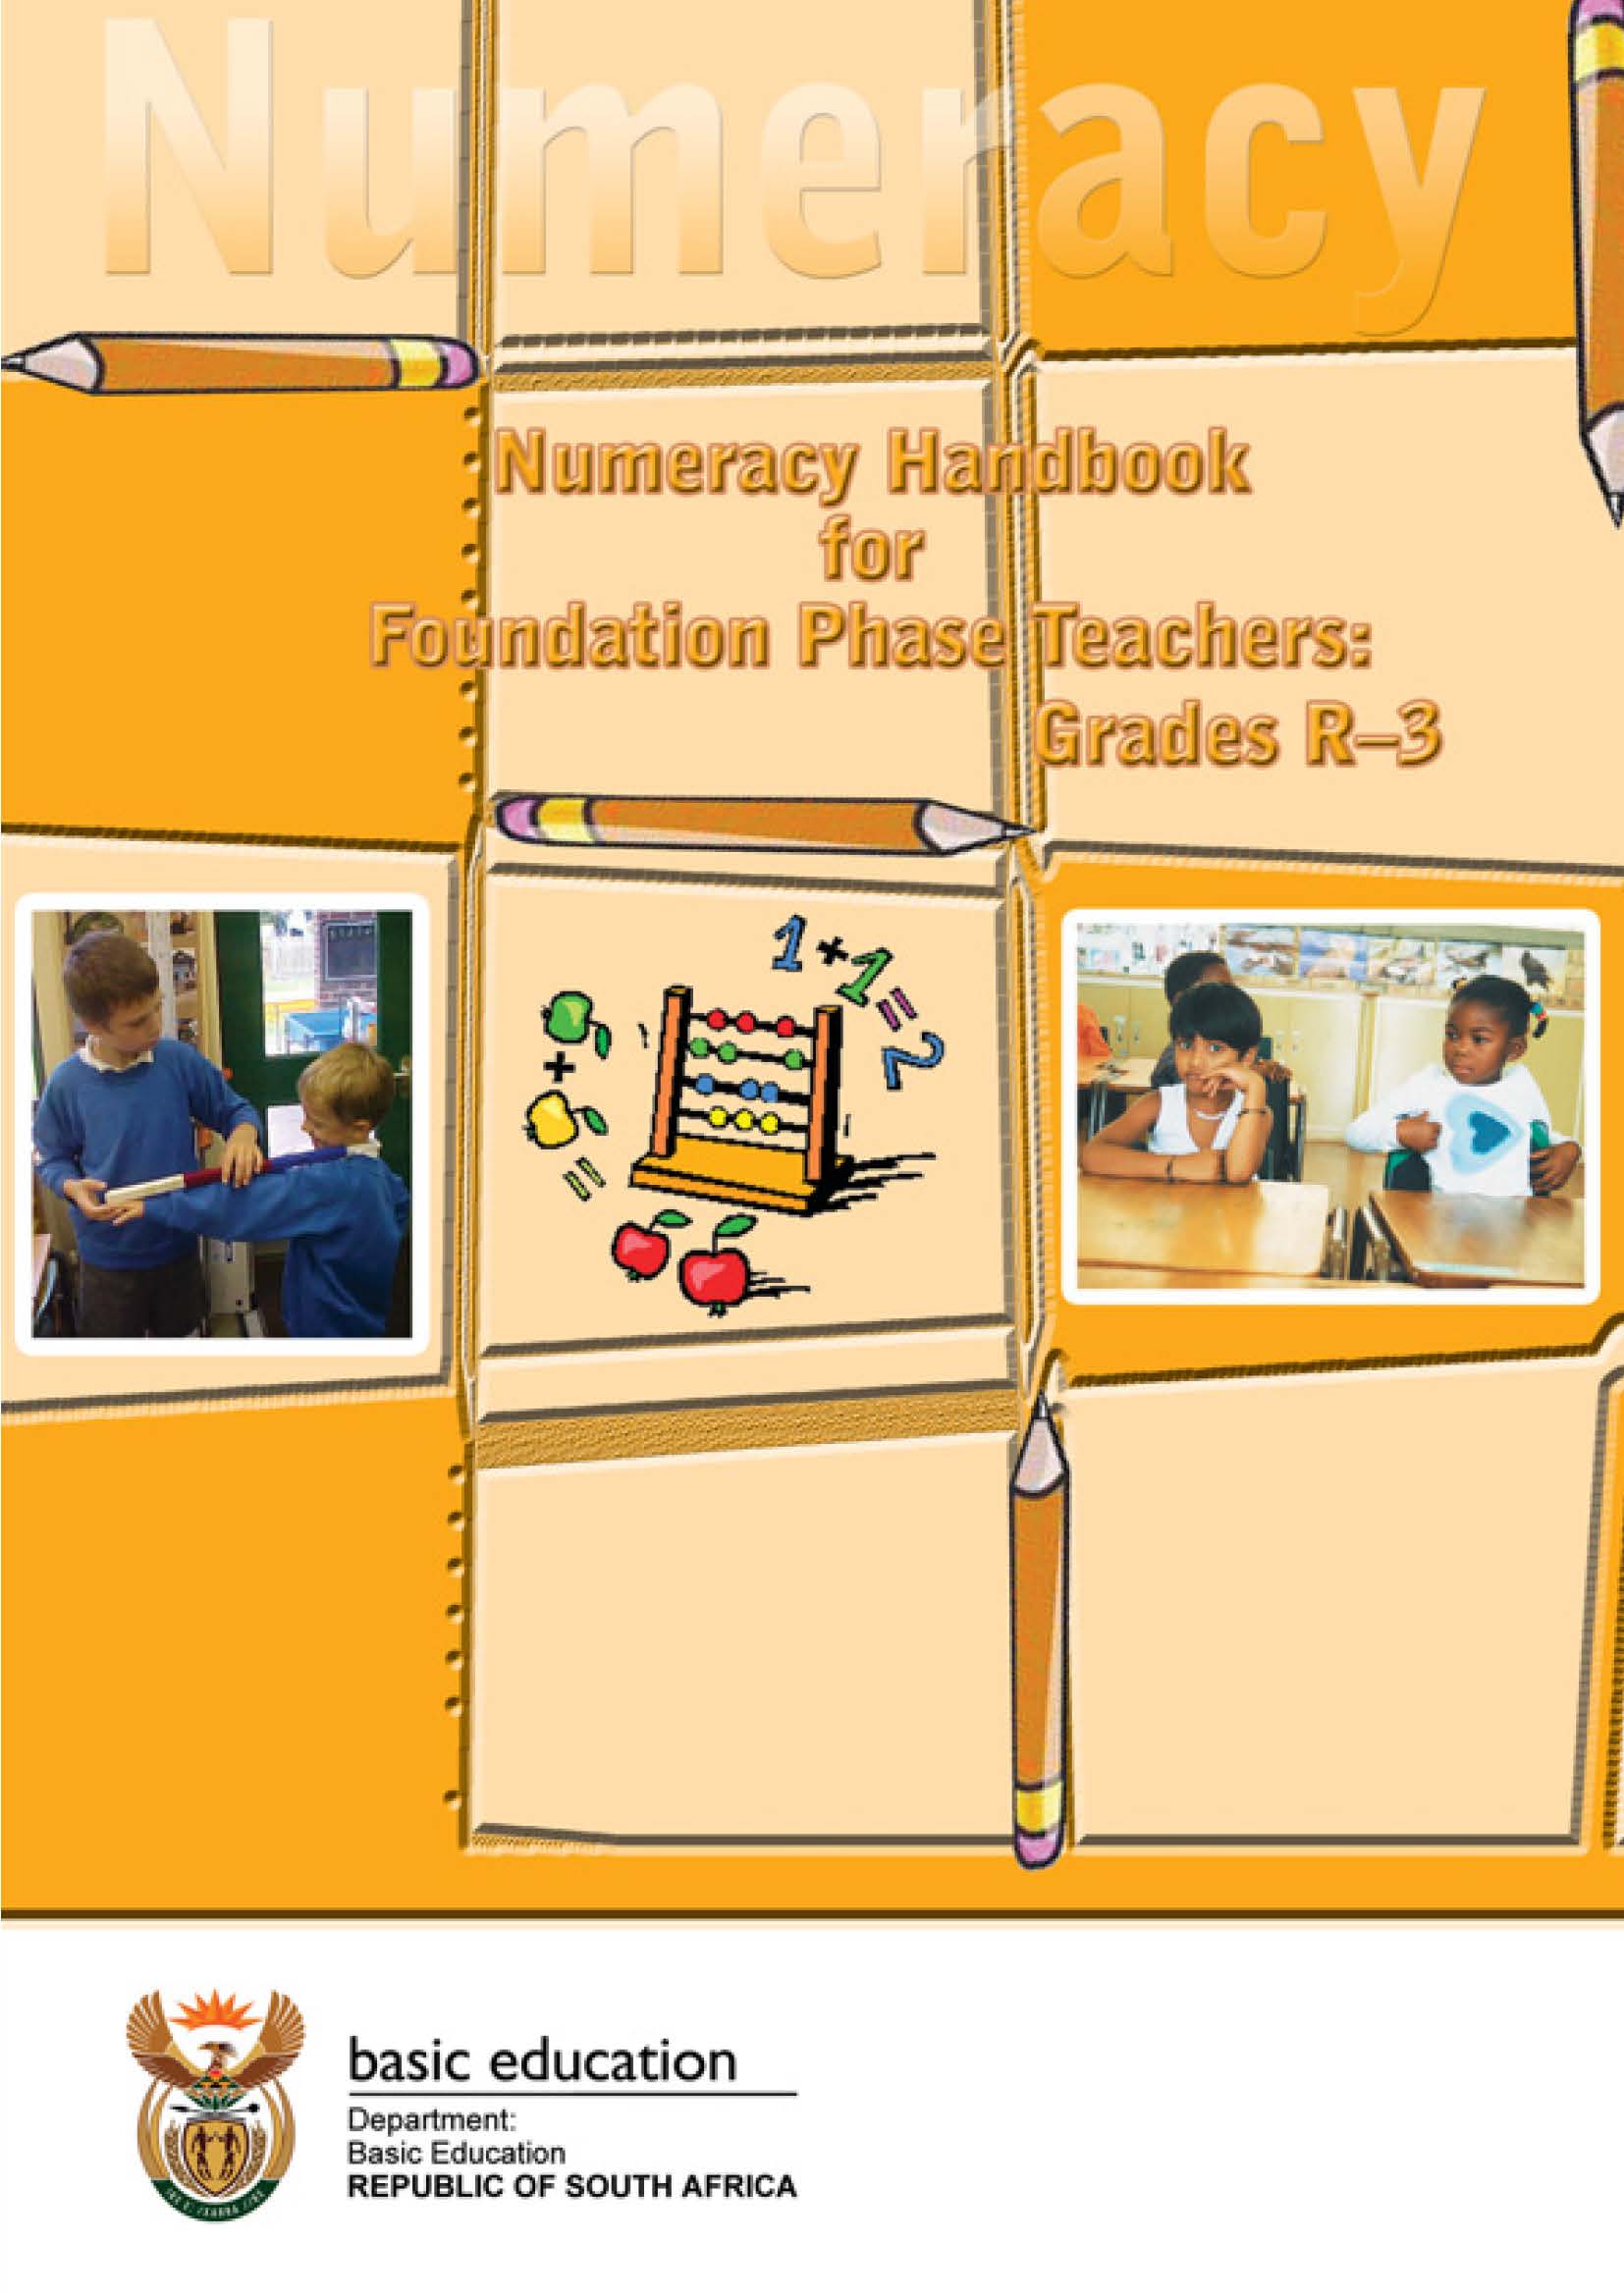 numeracy-handbook-for-foundation-phase-teachers-caps-edition-jet-education-services